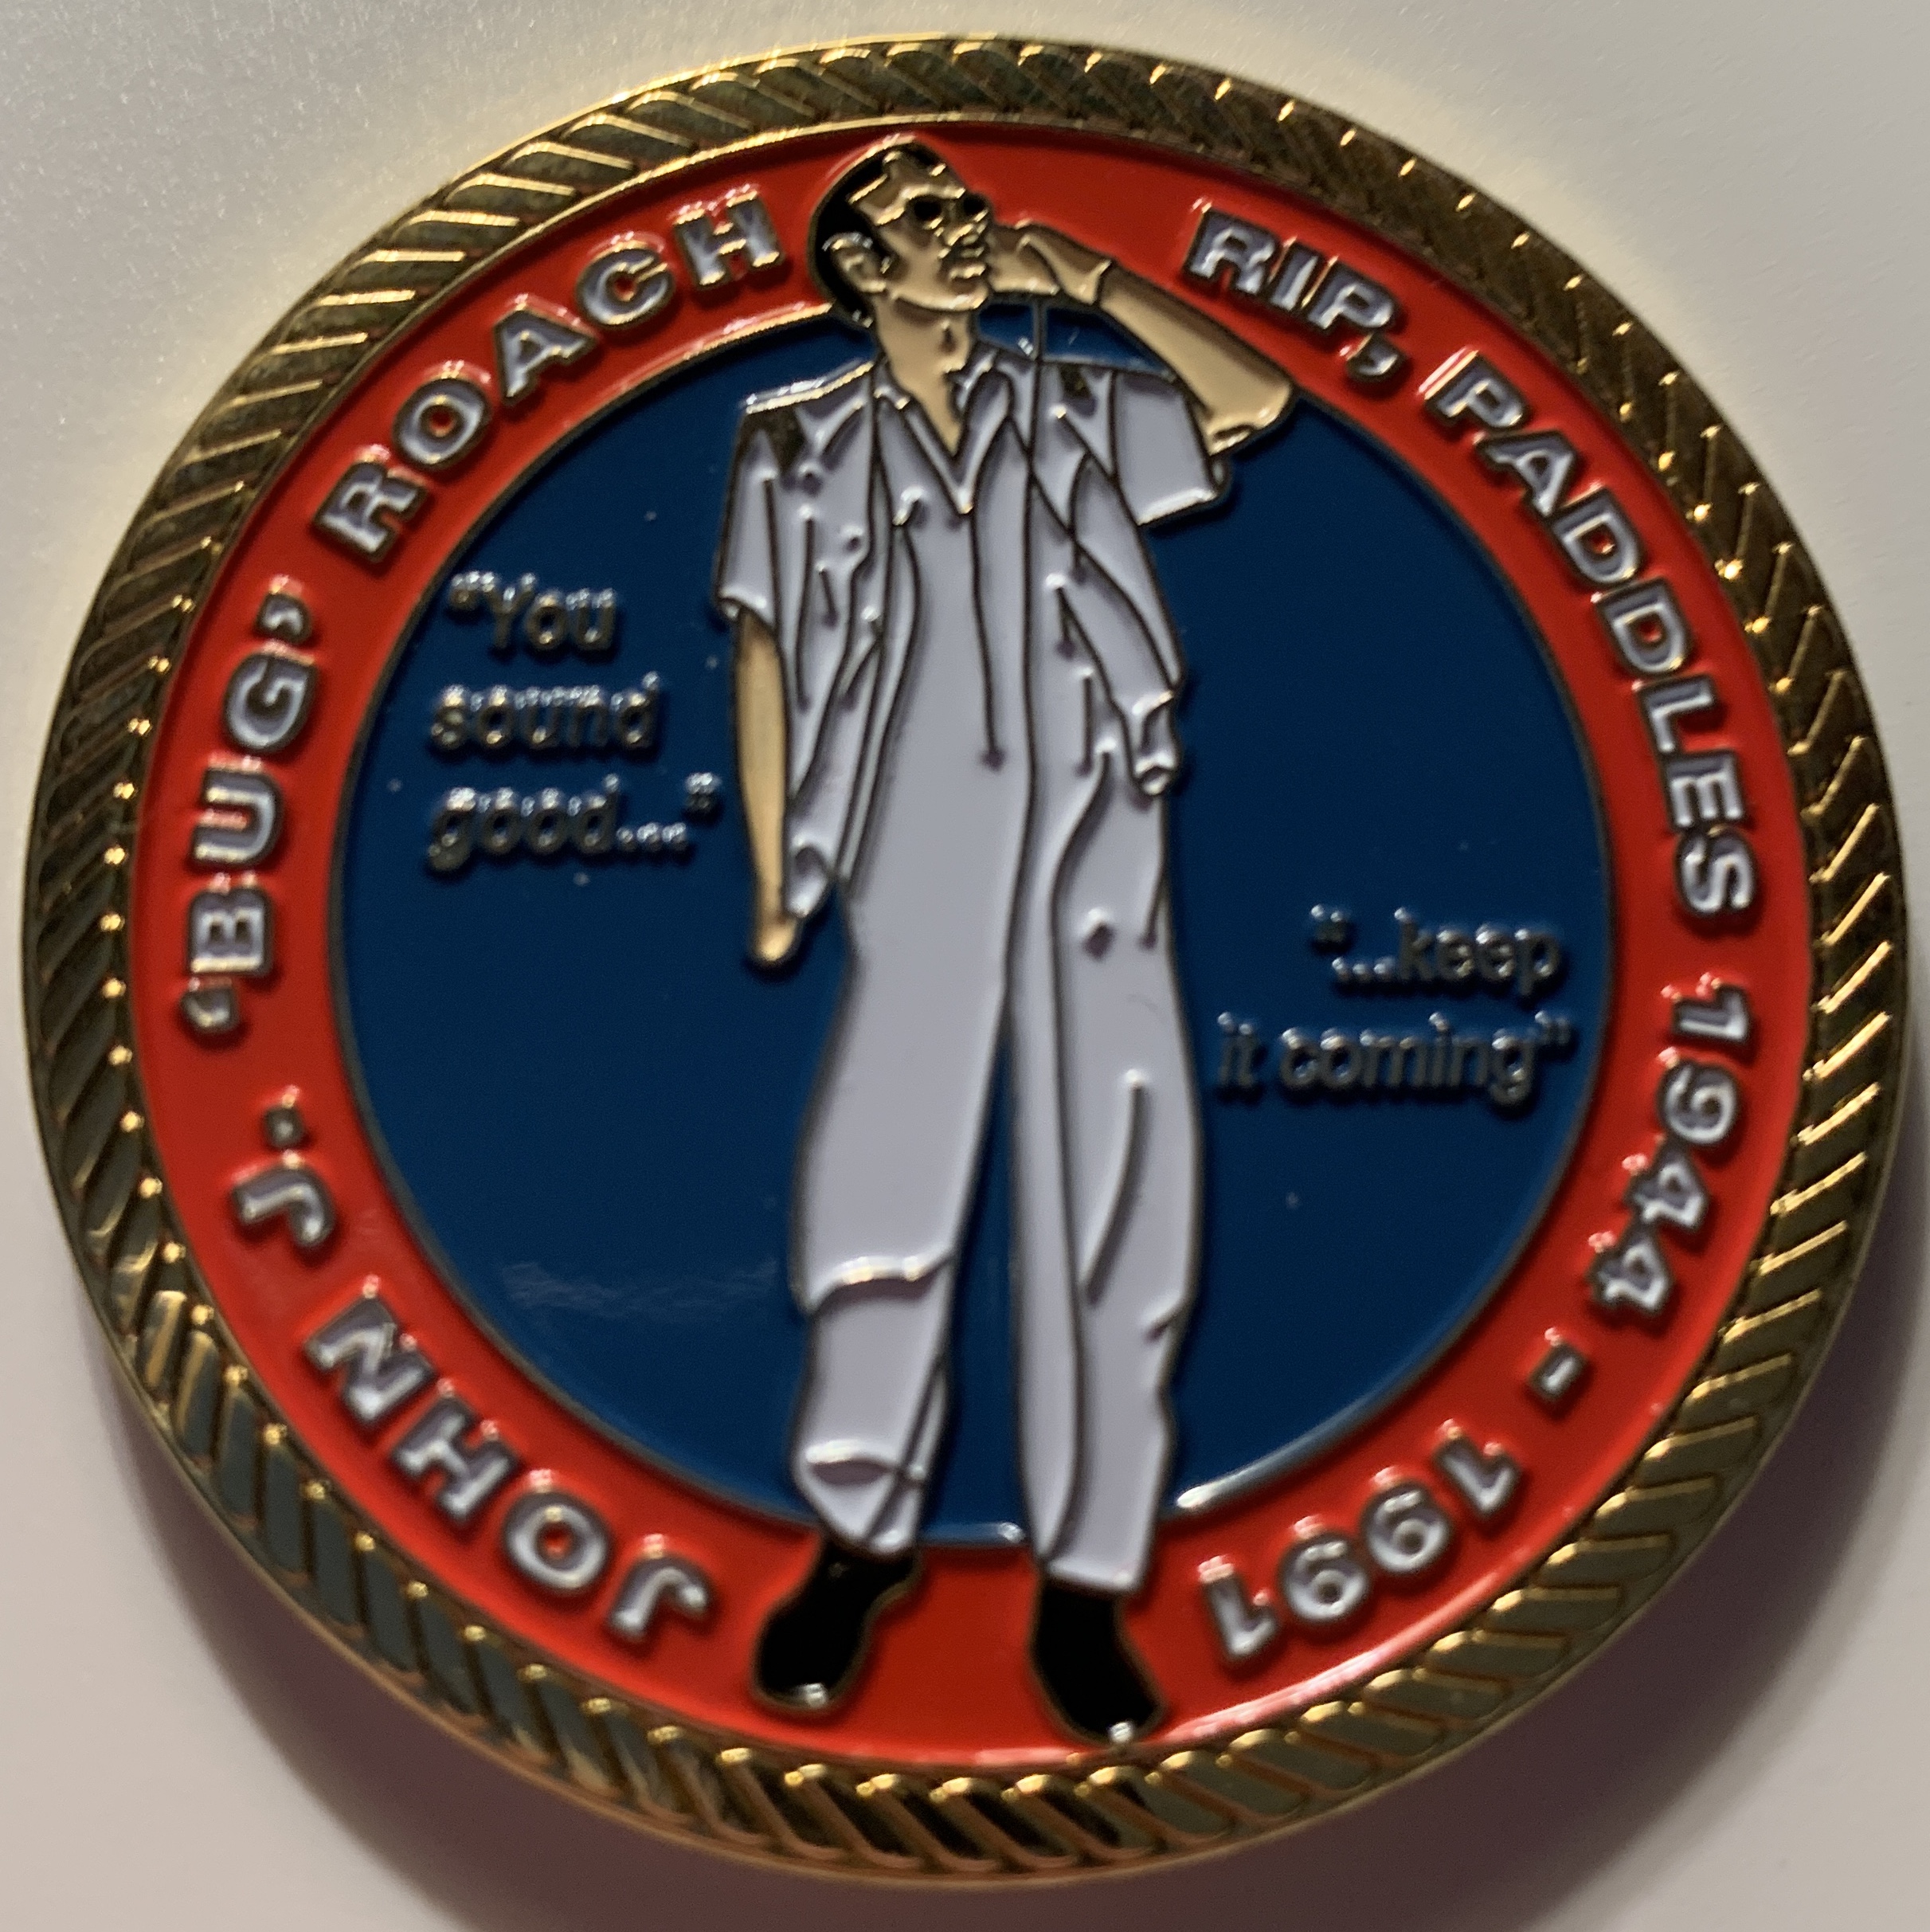 USN LSO John *BUG* ROACH Commemorative Coin (Front)